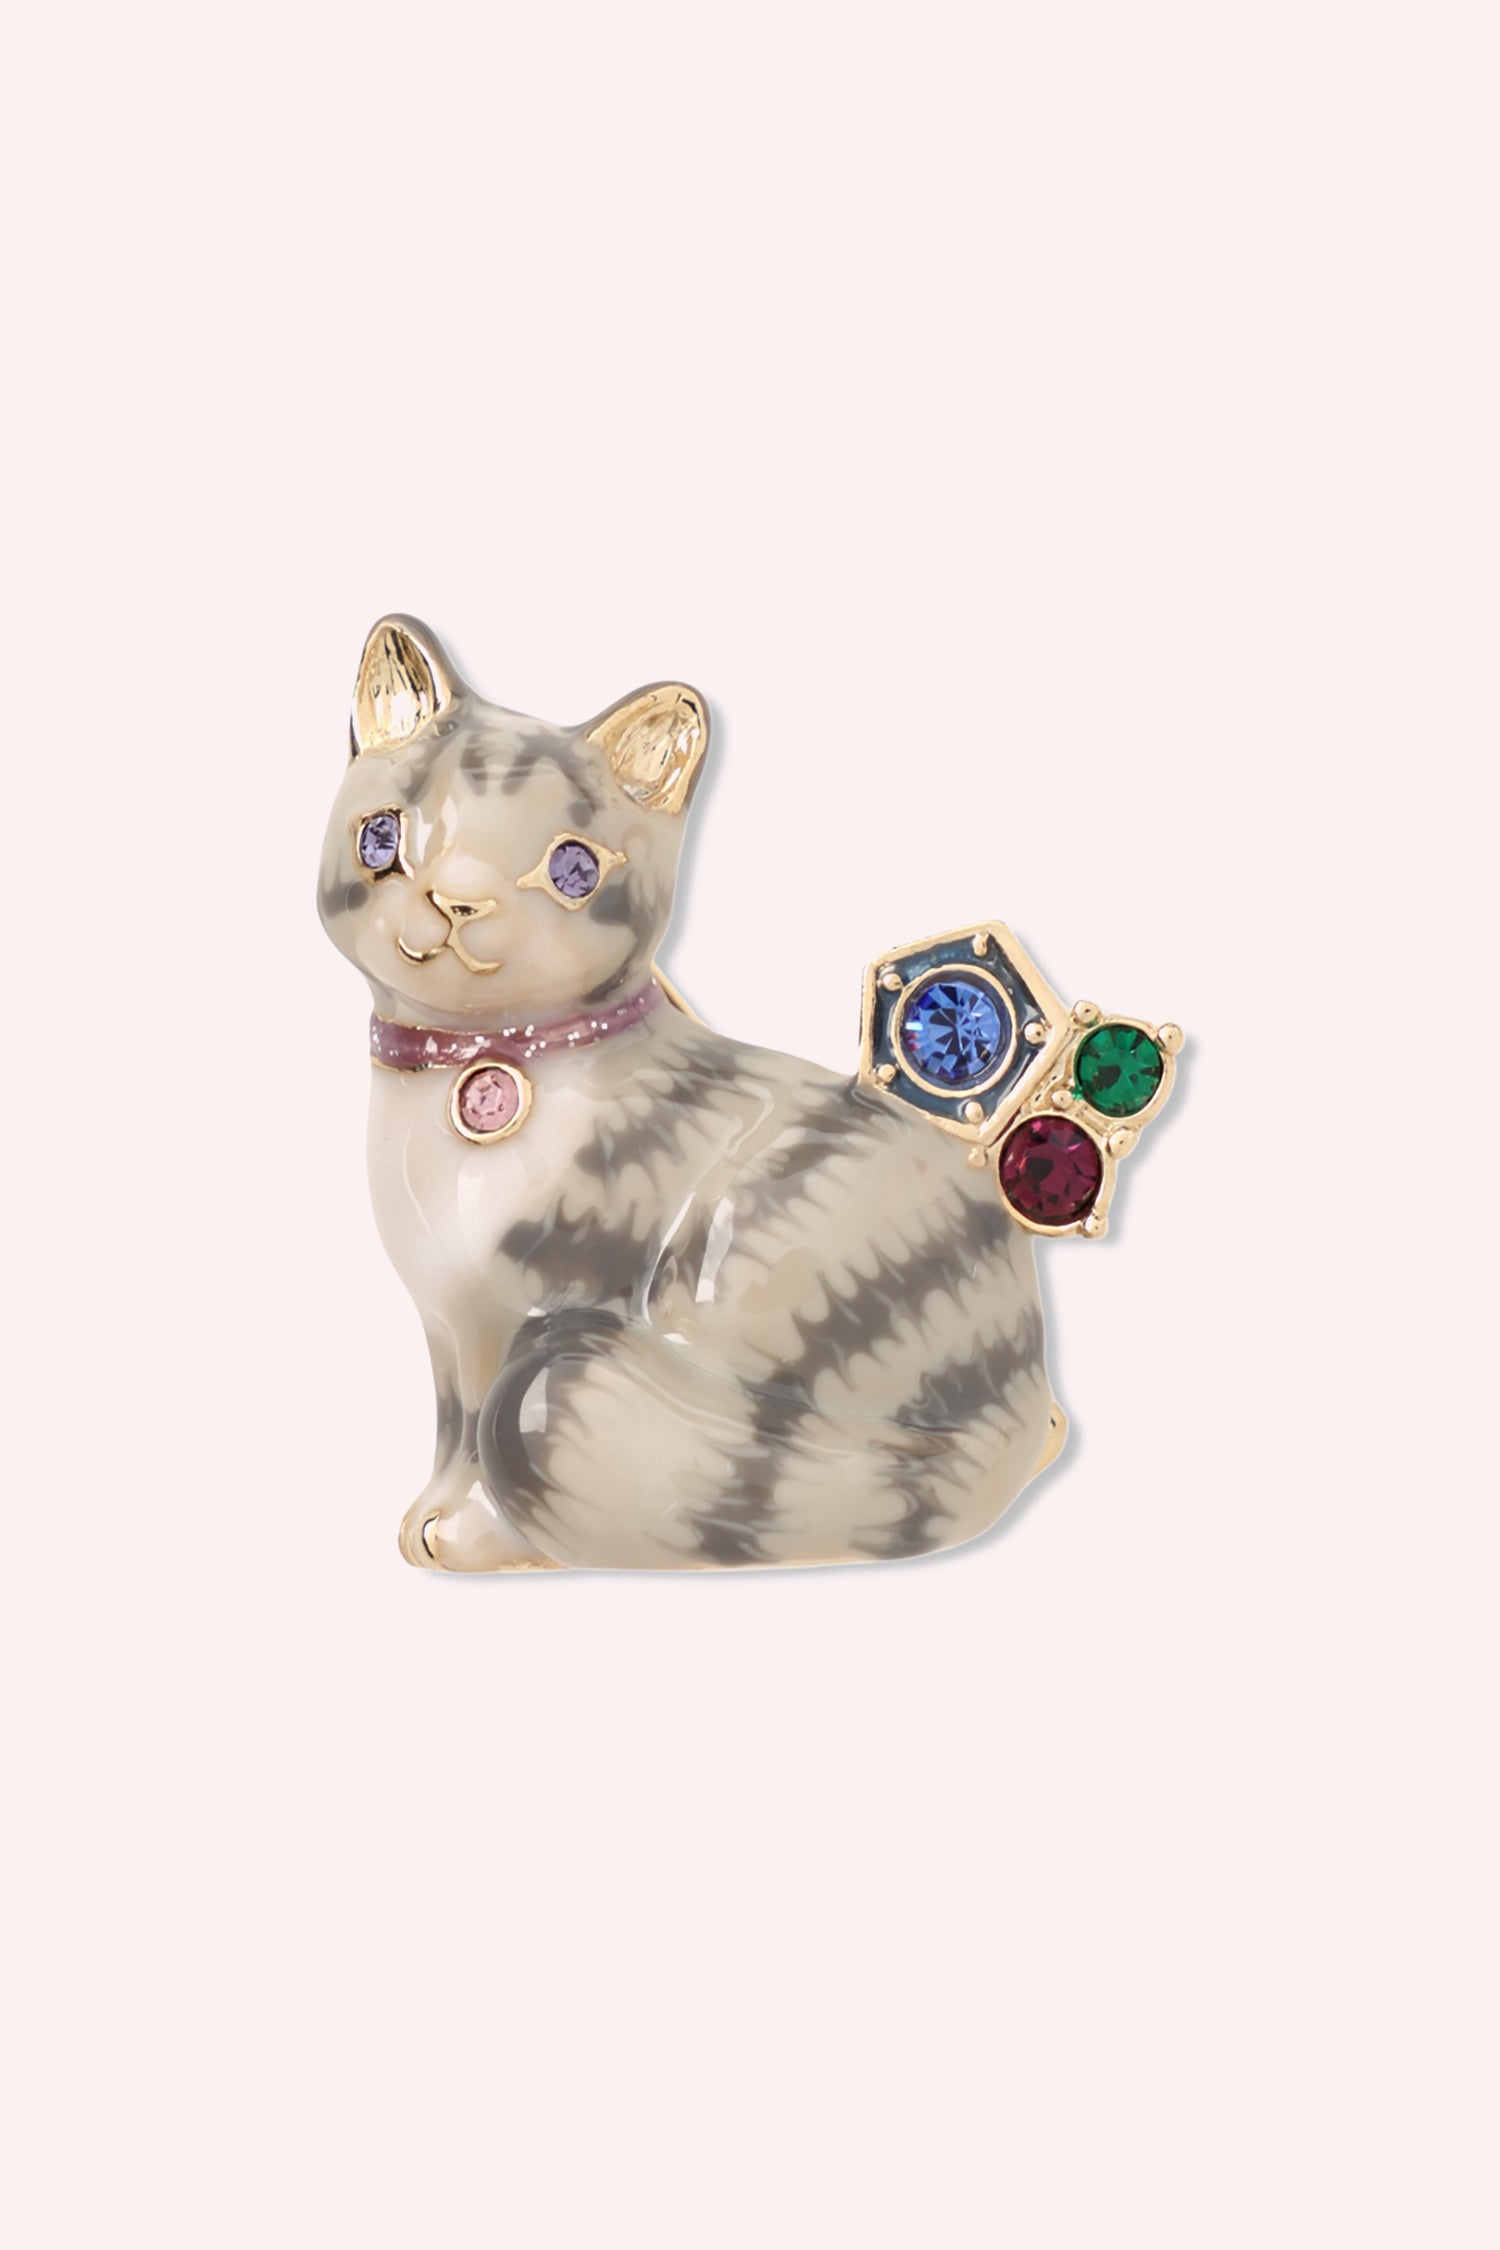 Striped Cat Brooch Grey cat brooch embellished with multi-colored blue/red/green gems